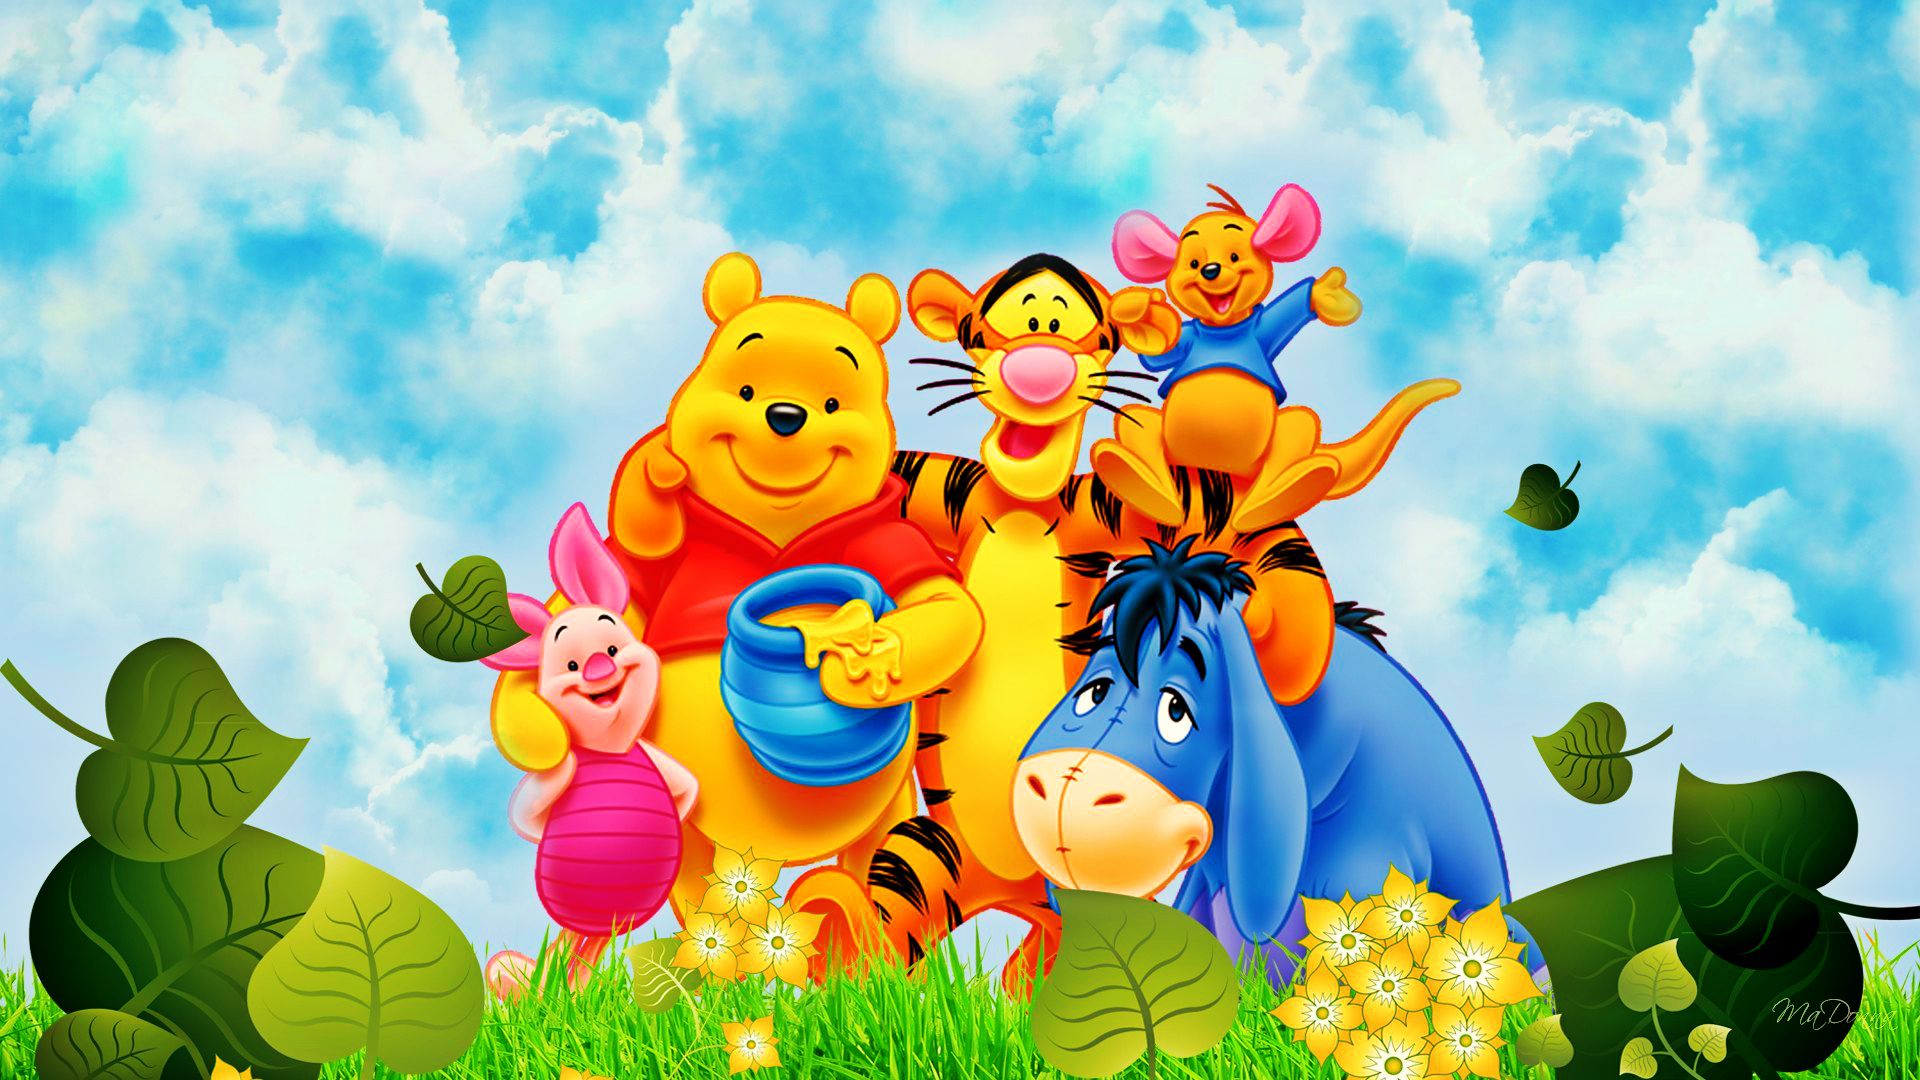 Winnie The Pooh Wallpapers HD crew